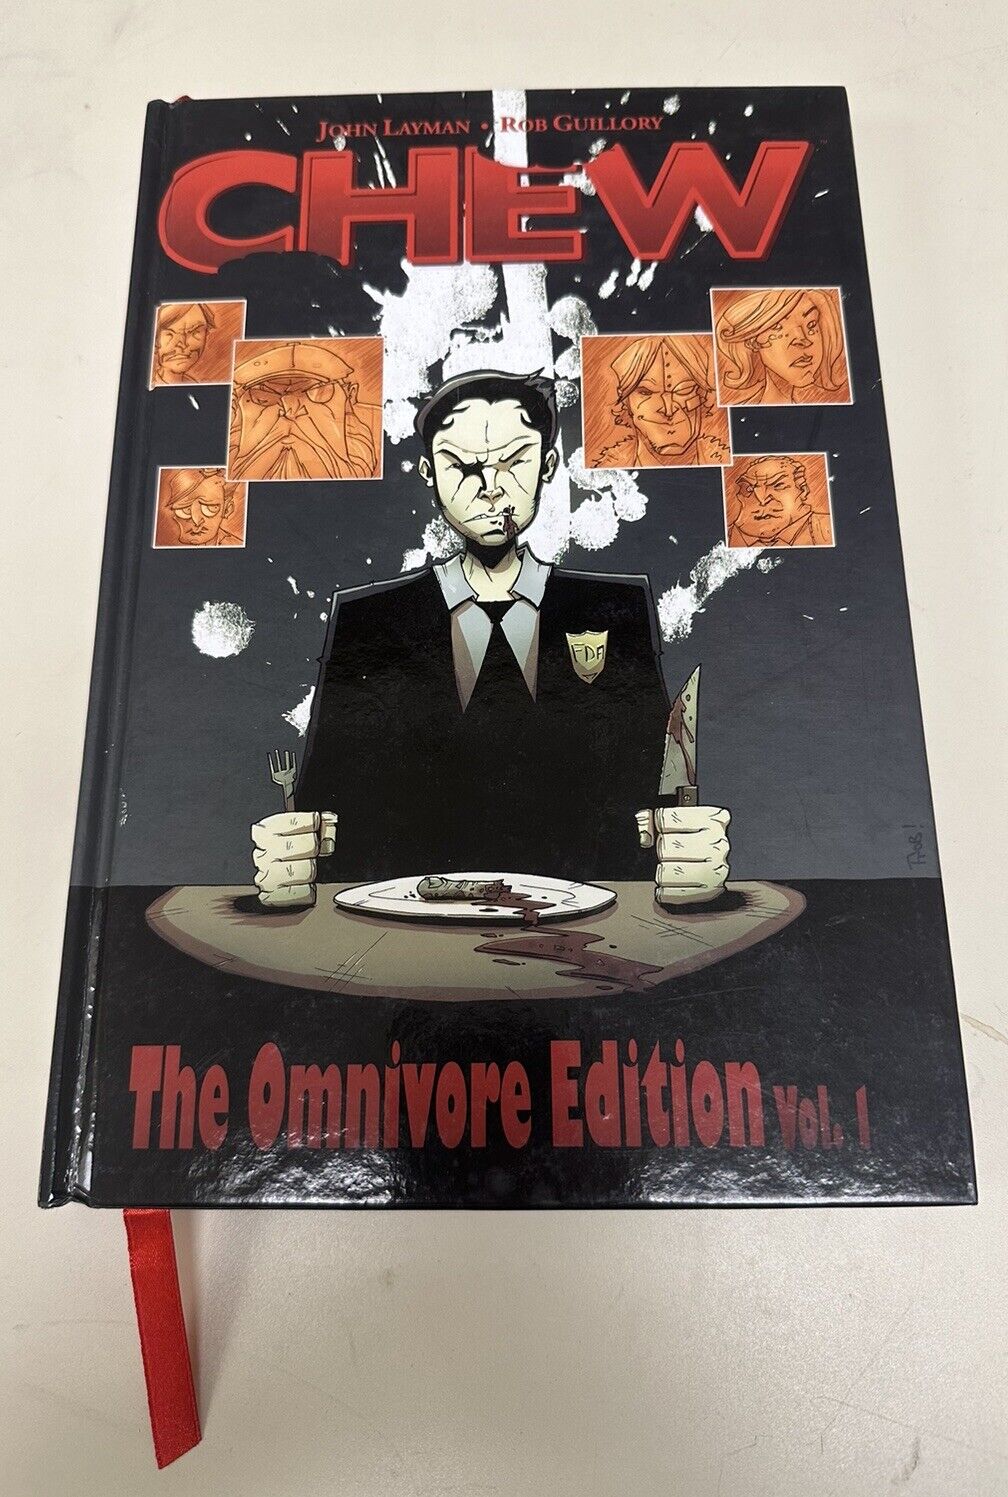 Chew Omnivore Edition Vol 1 First Print Hardcover Image John Layman Rob Guillory